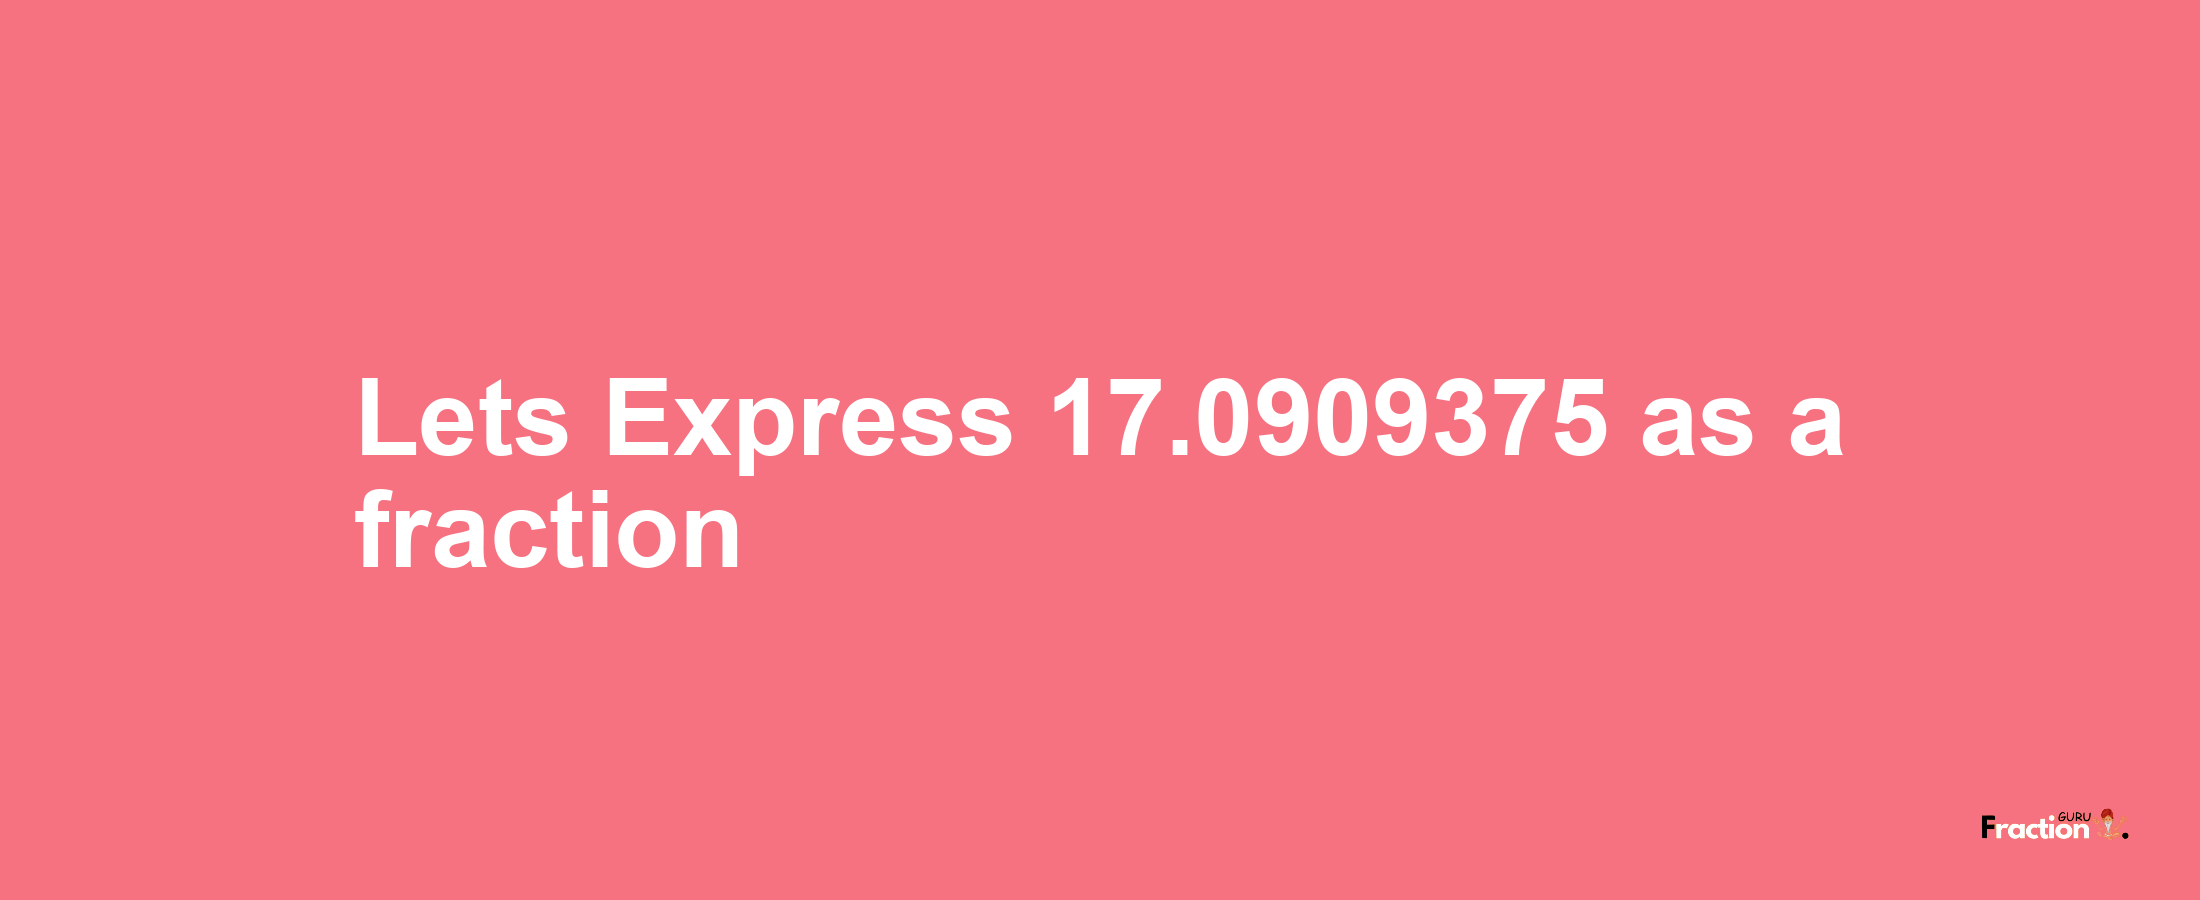 Lets Express 17.0909375 as afraction